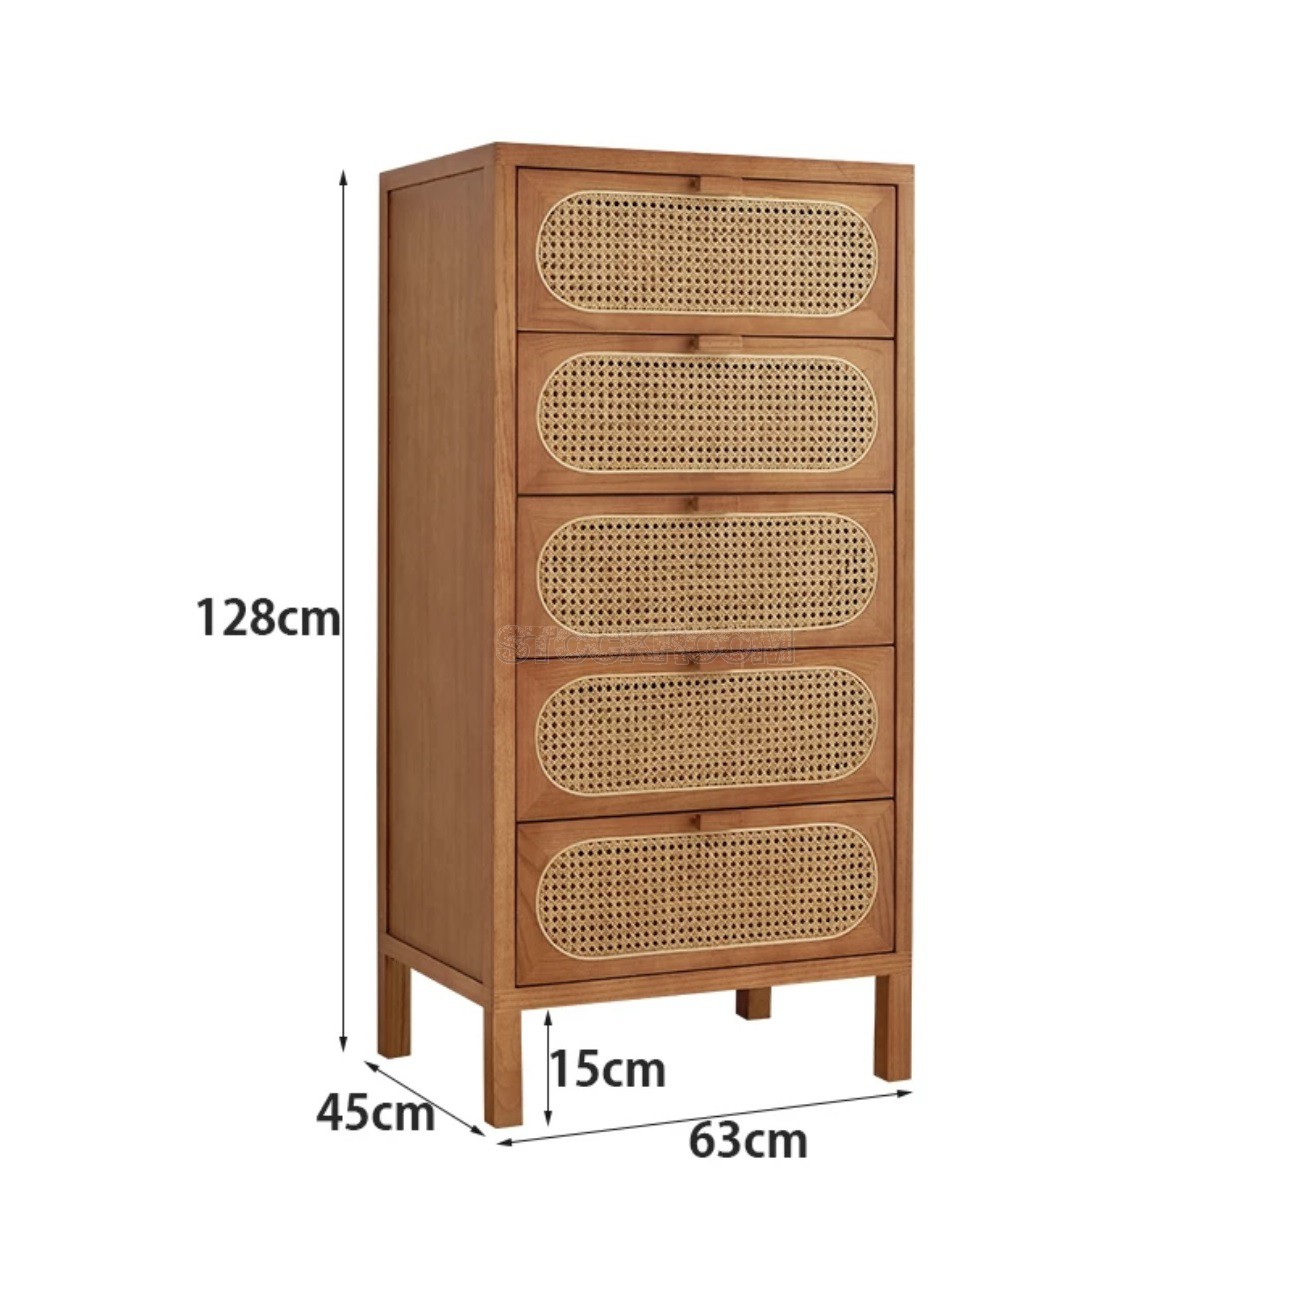 Ayala Rattan Woven Solid Wood 5 Drawers Dresser Sideboard Cabinet